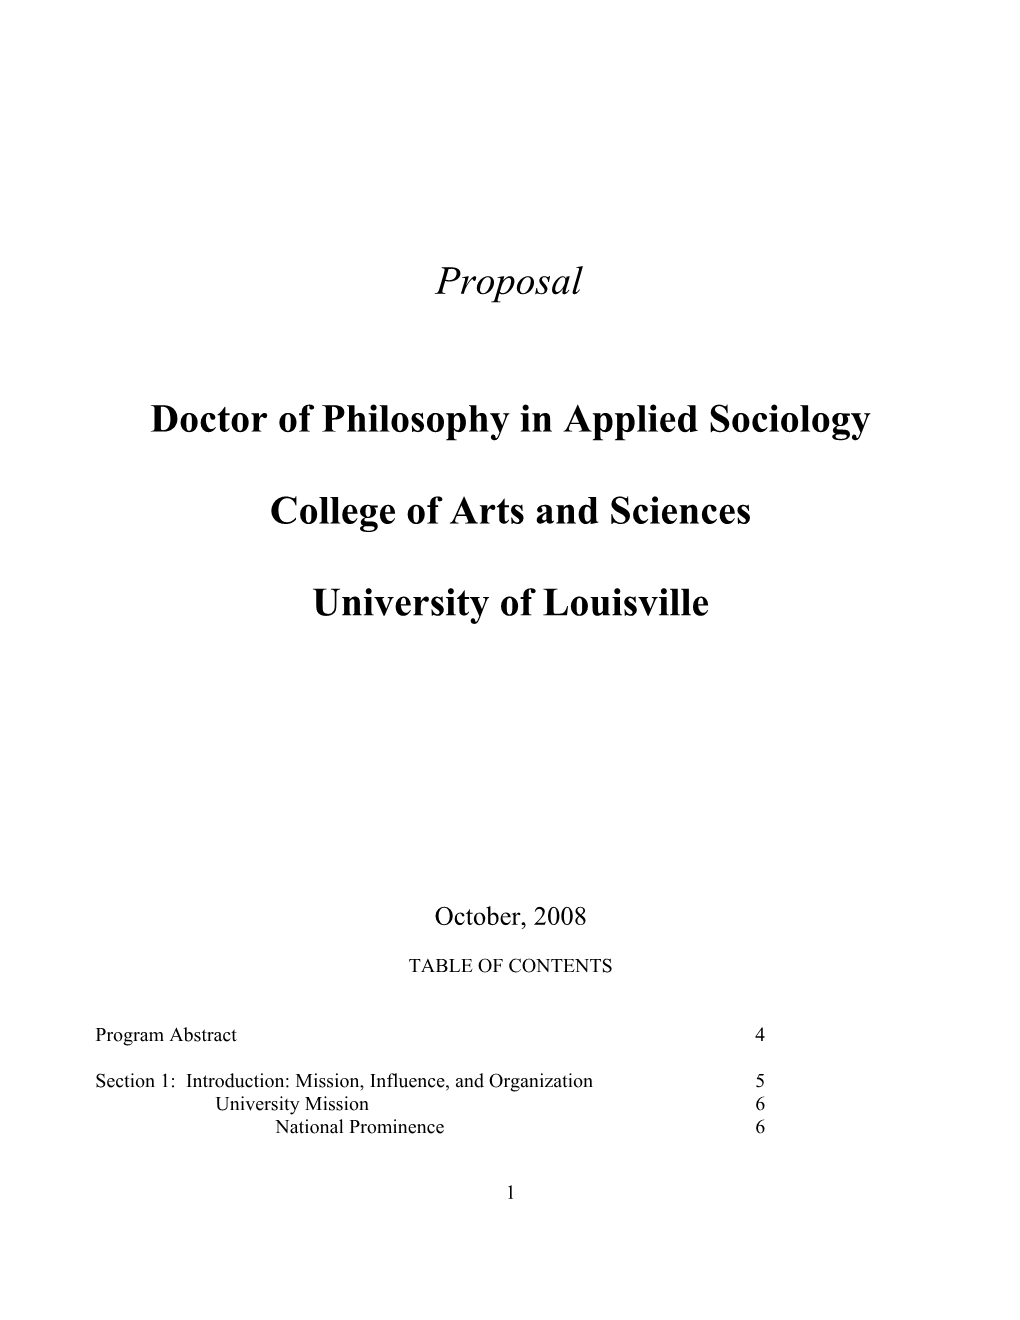 Doctor of Philosophy in Applied Sociology